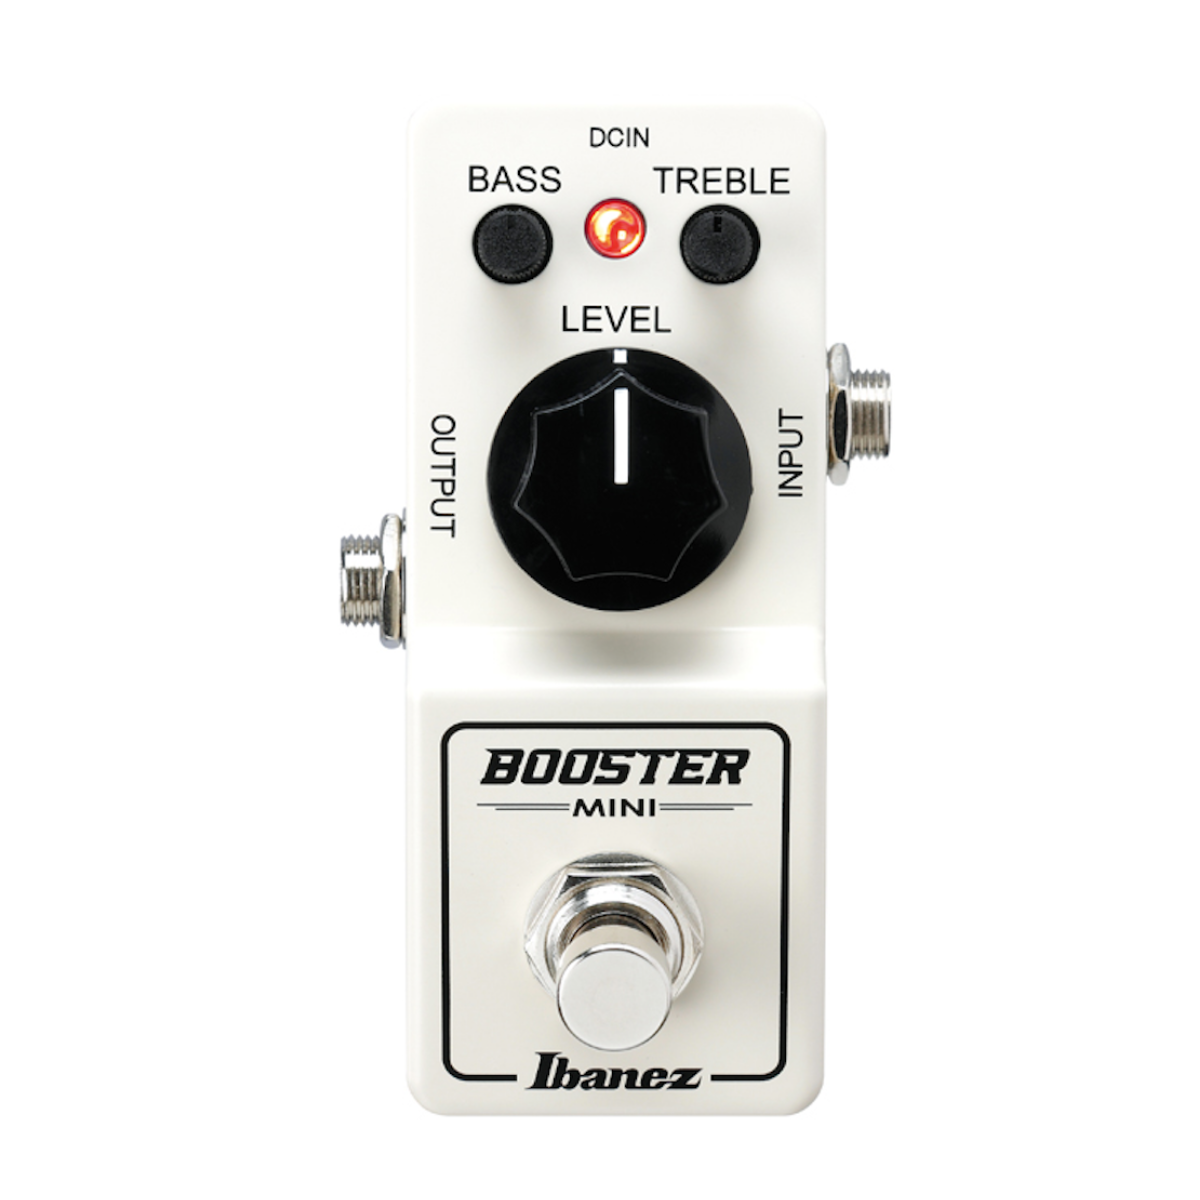 Ibanez MINI Booster Pedal